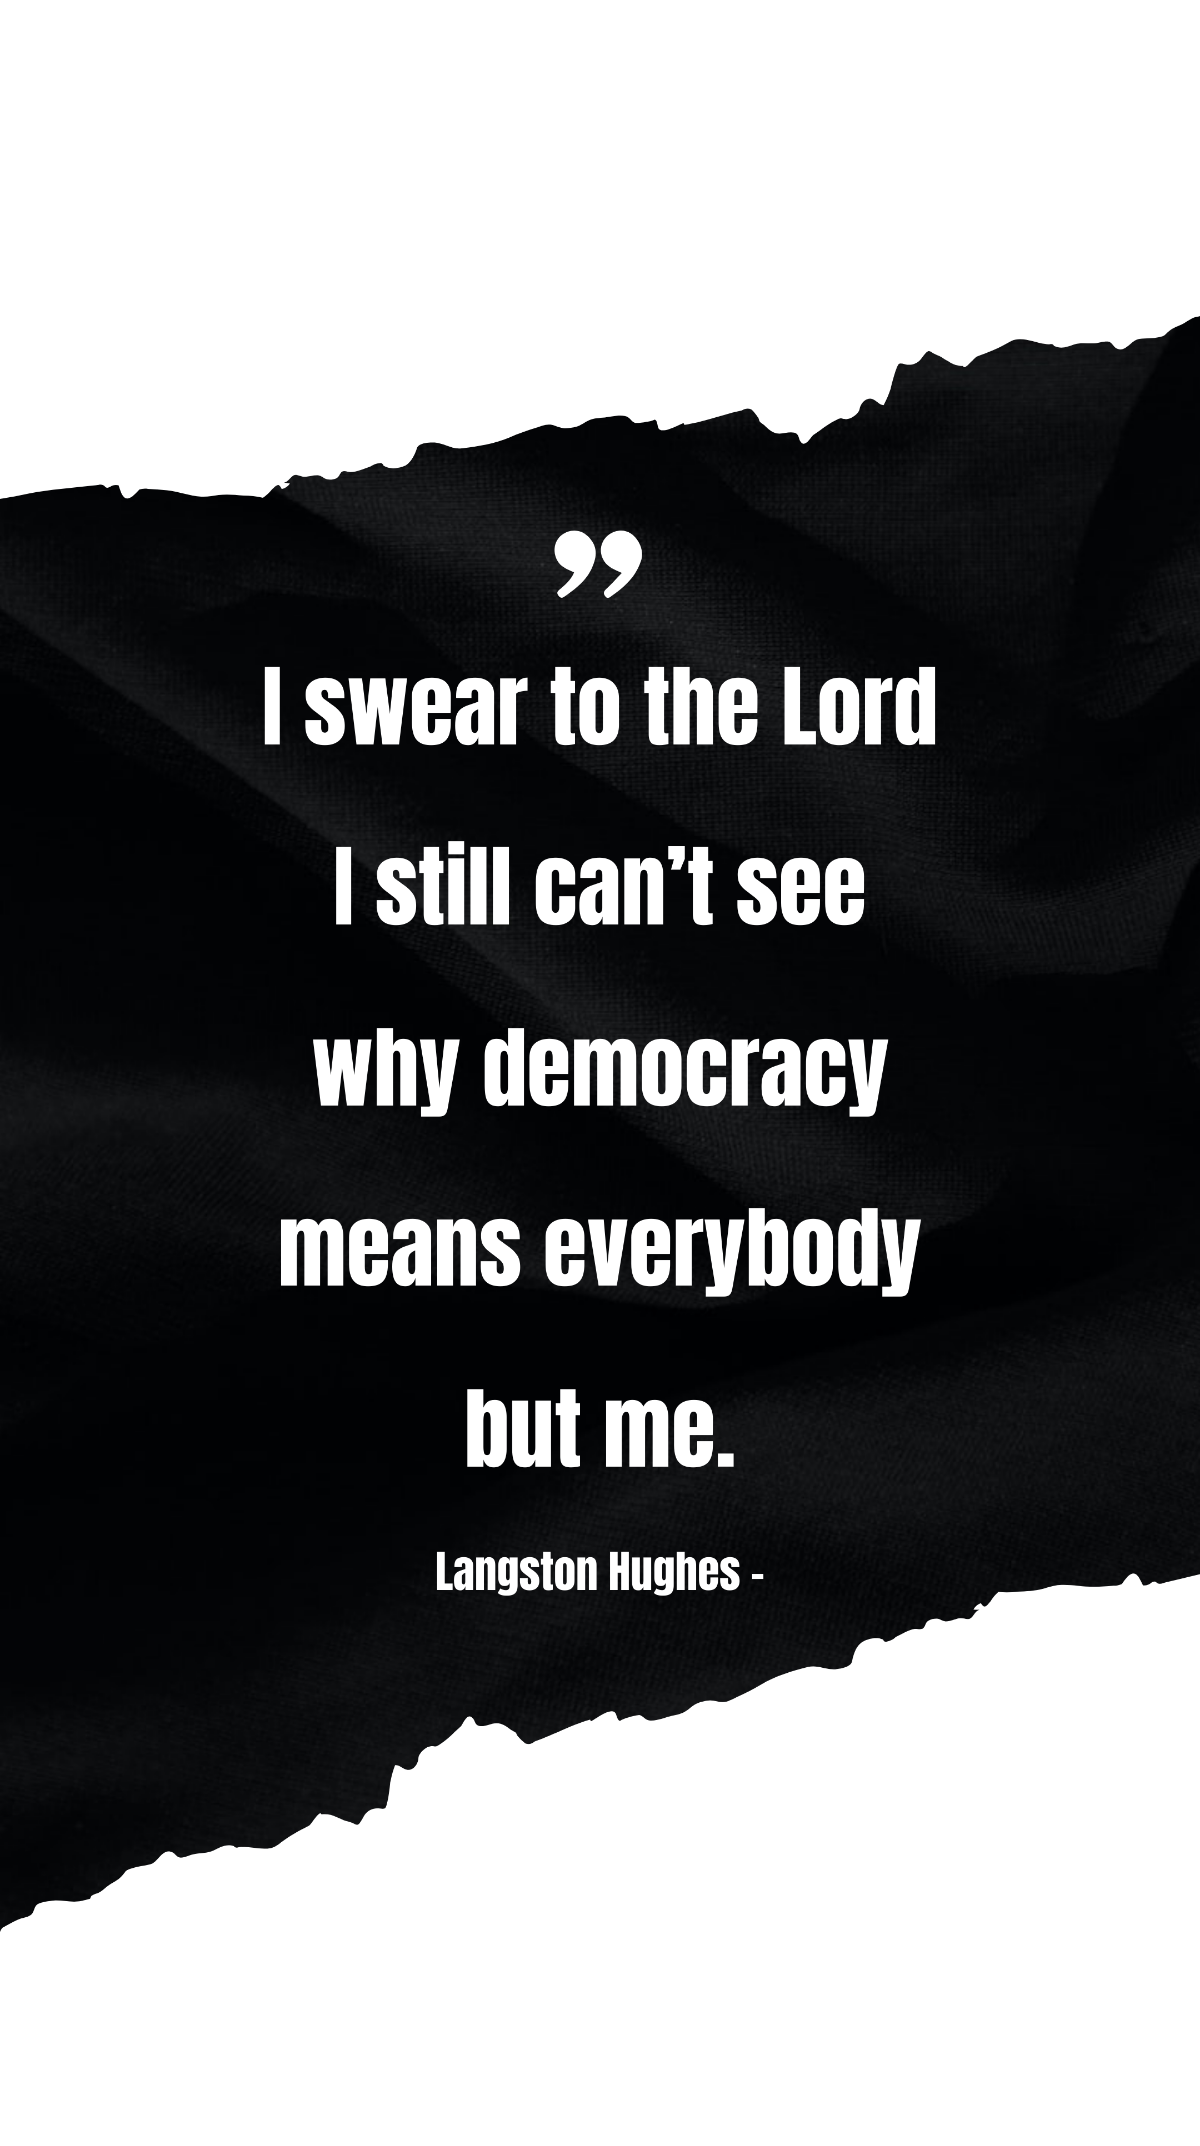 Langston Hughes - I swear to the Lord I still can’t see why democracy means everybody but me. Template